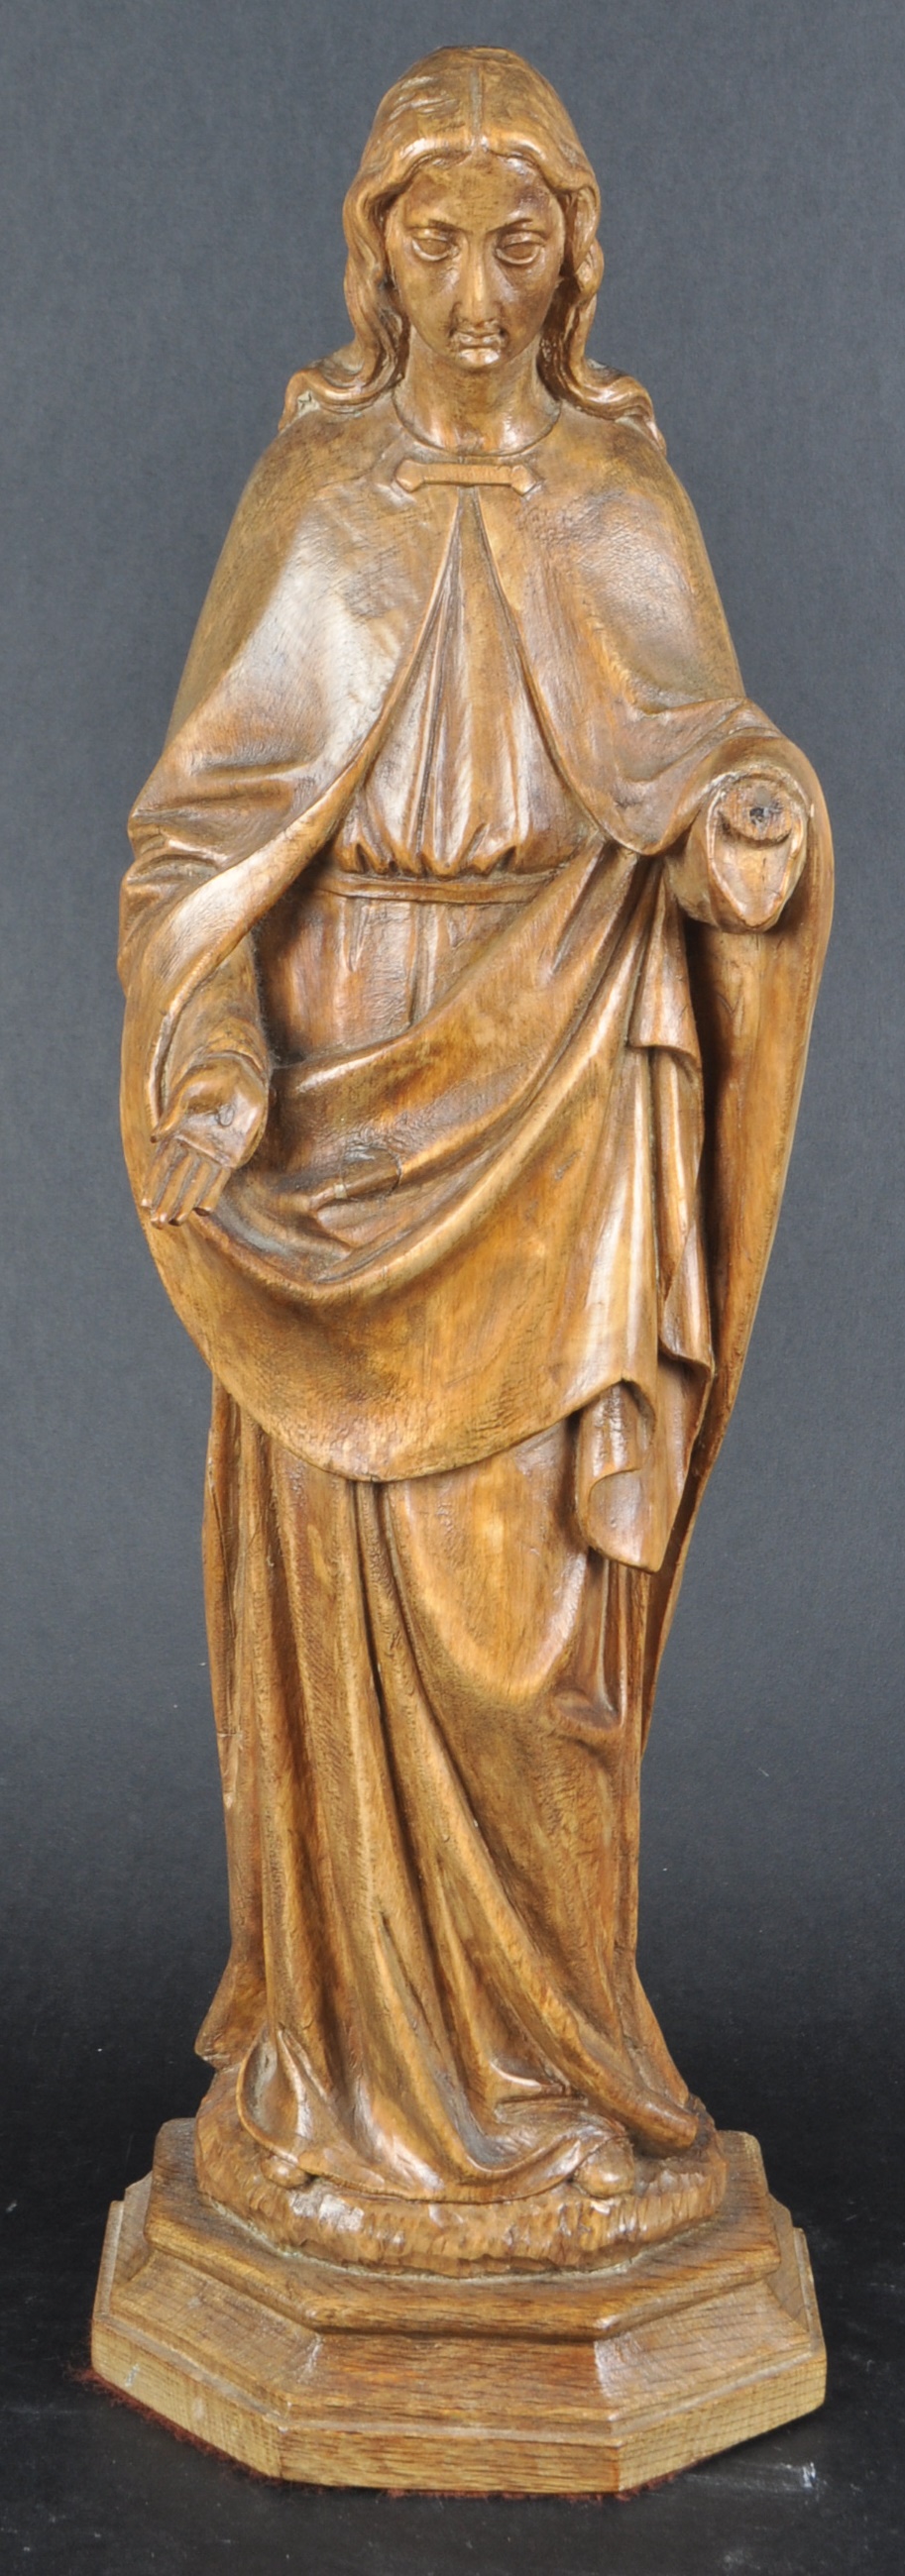 LARGE WALNUT CARVING OF THE VIRGIN MARY